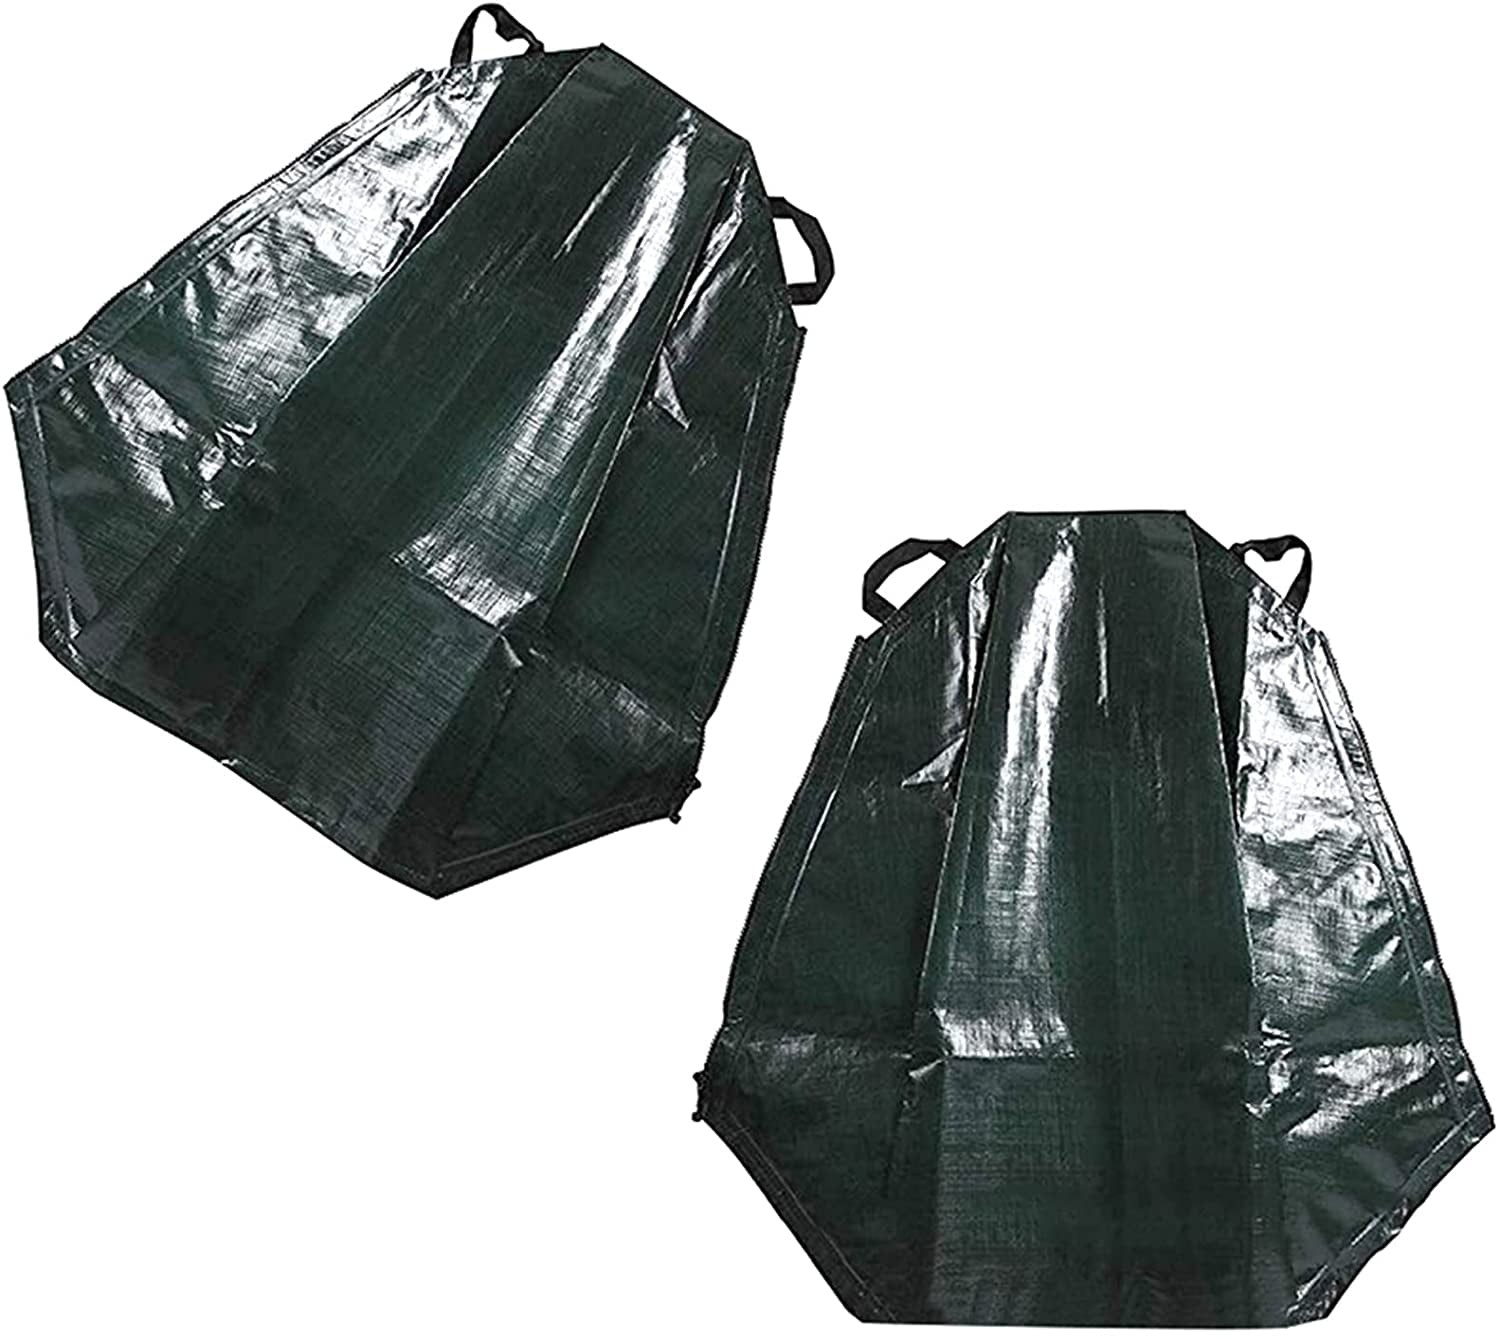 5 Pack 5-8 Hours Releasing Time Tree Watering Bag 20 Gallon Watering Bag for Trees with Heavy Duty Zipper Premium PVC Tree Bags Slow Release Drippers Bag for Trees 